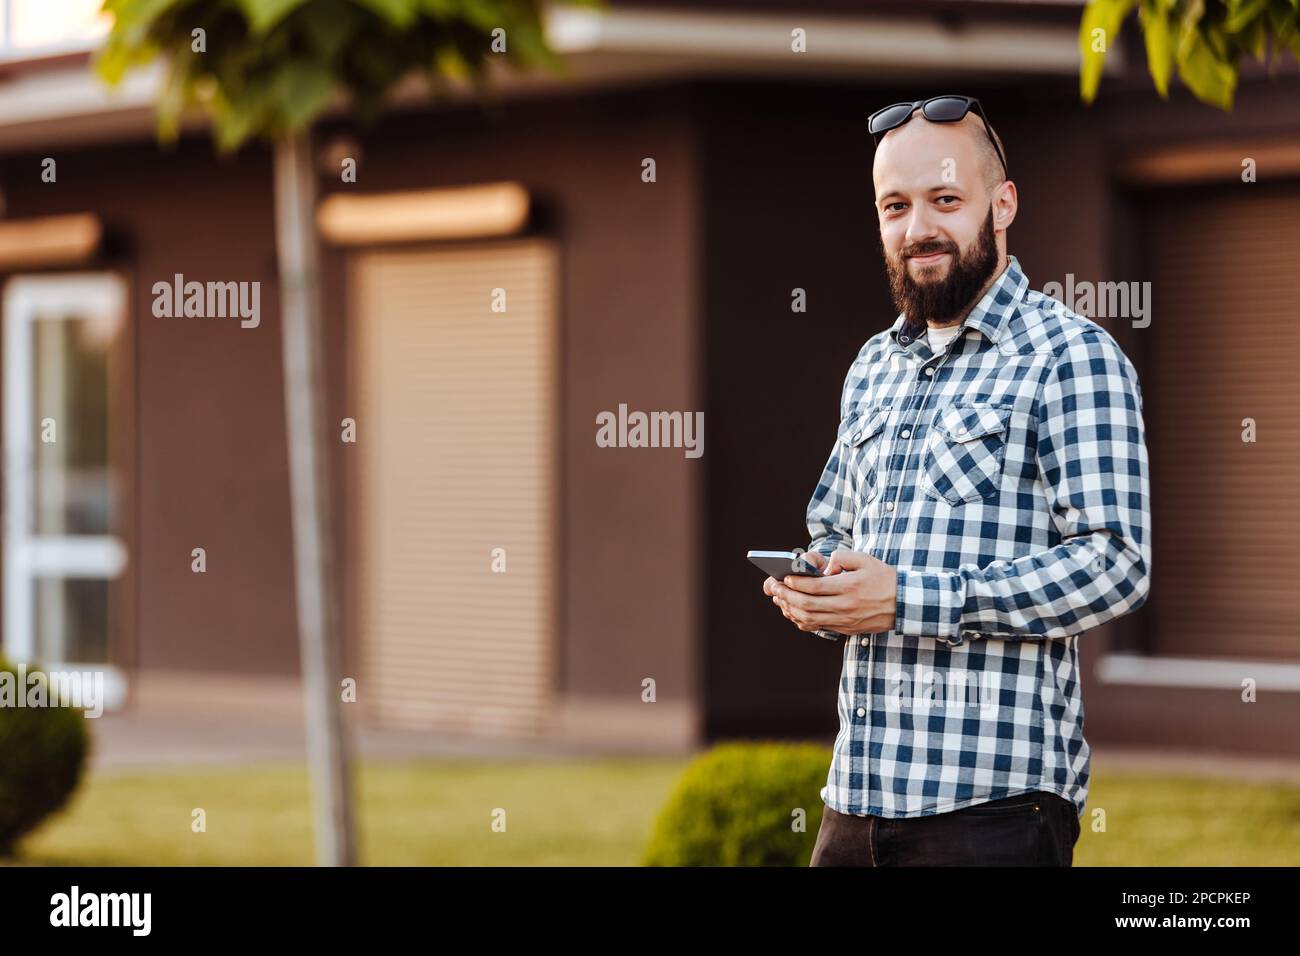 A young man walks in the park and uses social networks using a mobile phone. Stock Photo